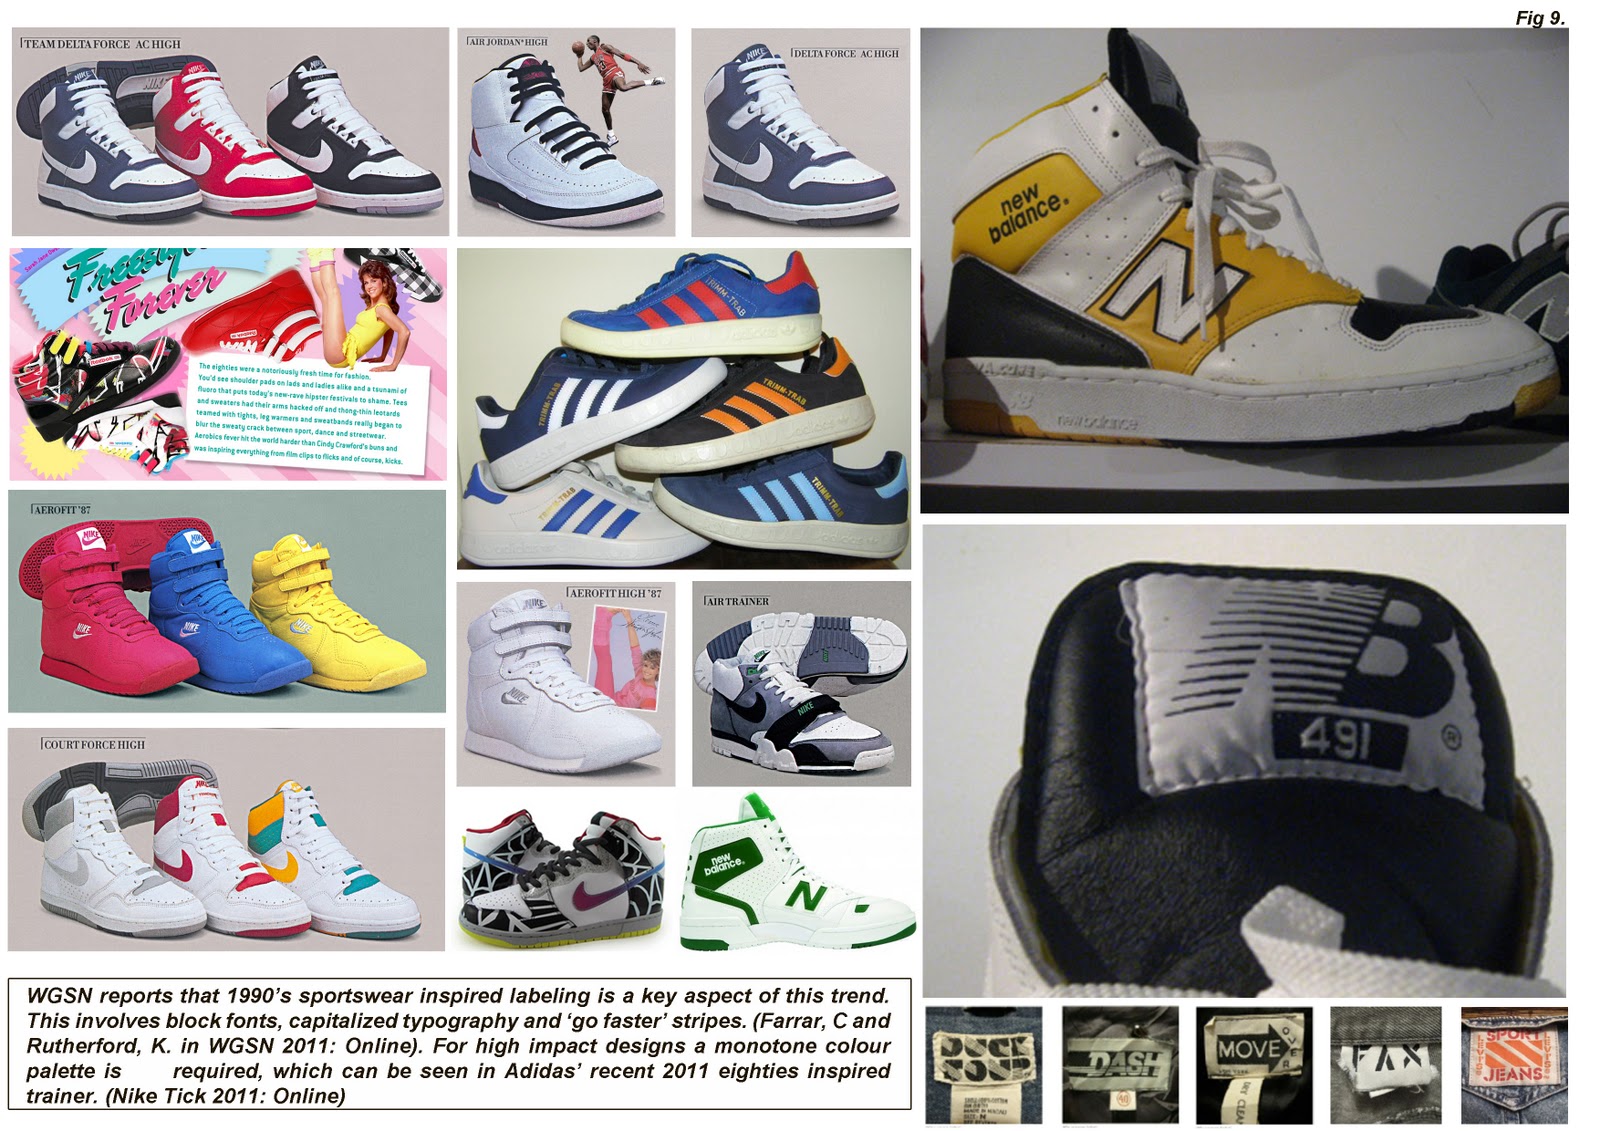 New Balance Research Blog: 80s TRENDS: INSPIRATIONAL MOODBOARD